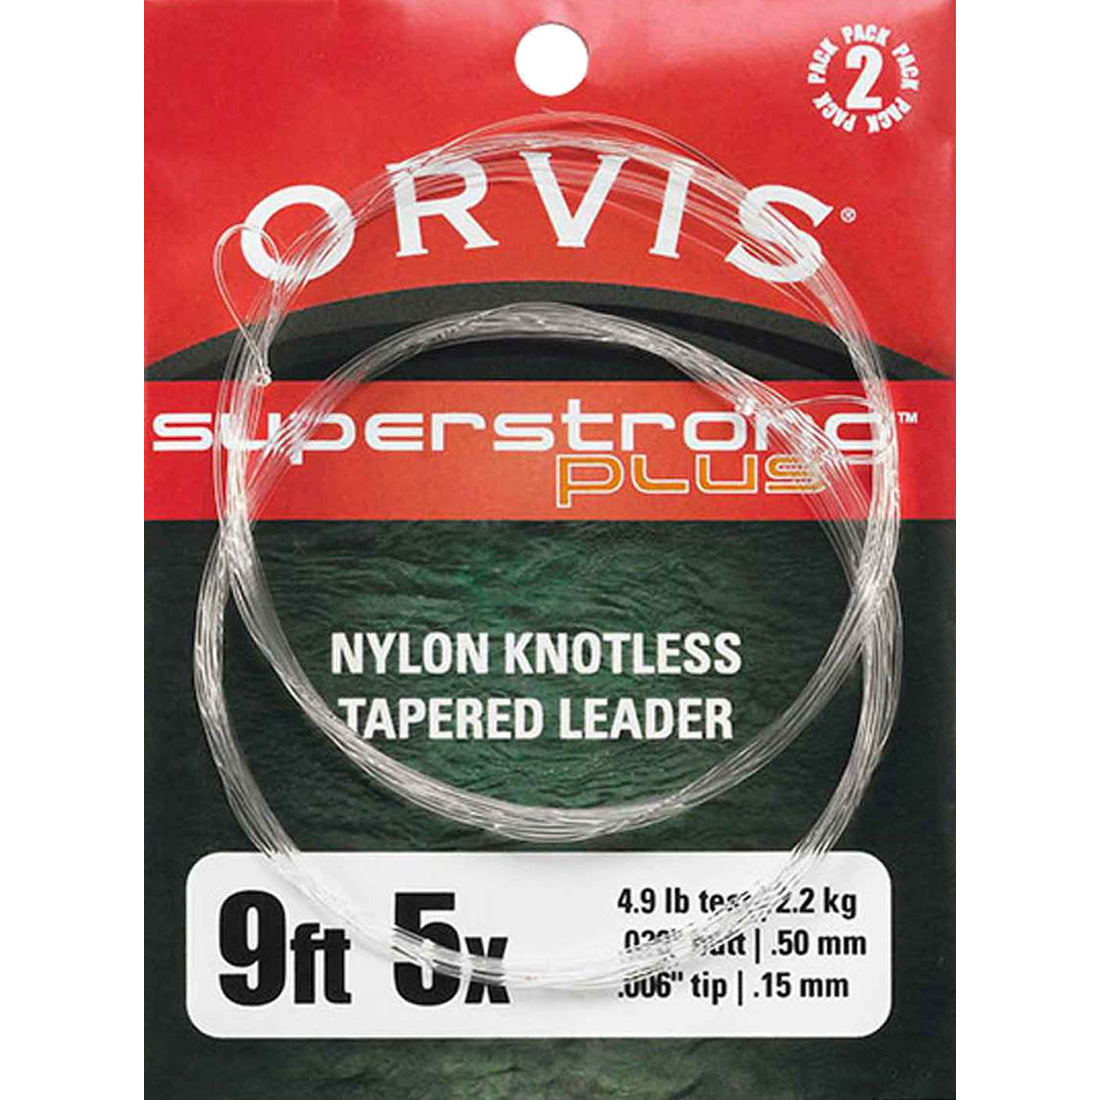 Orvis SuperStrong Plus Leader 2pk